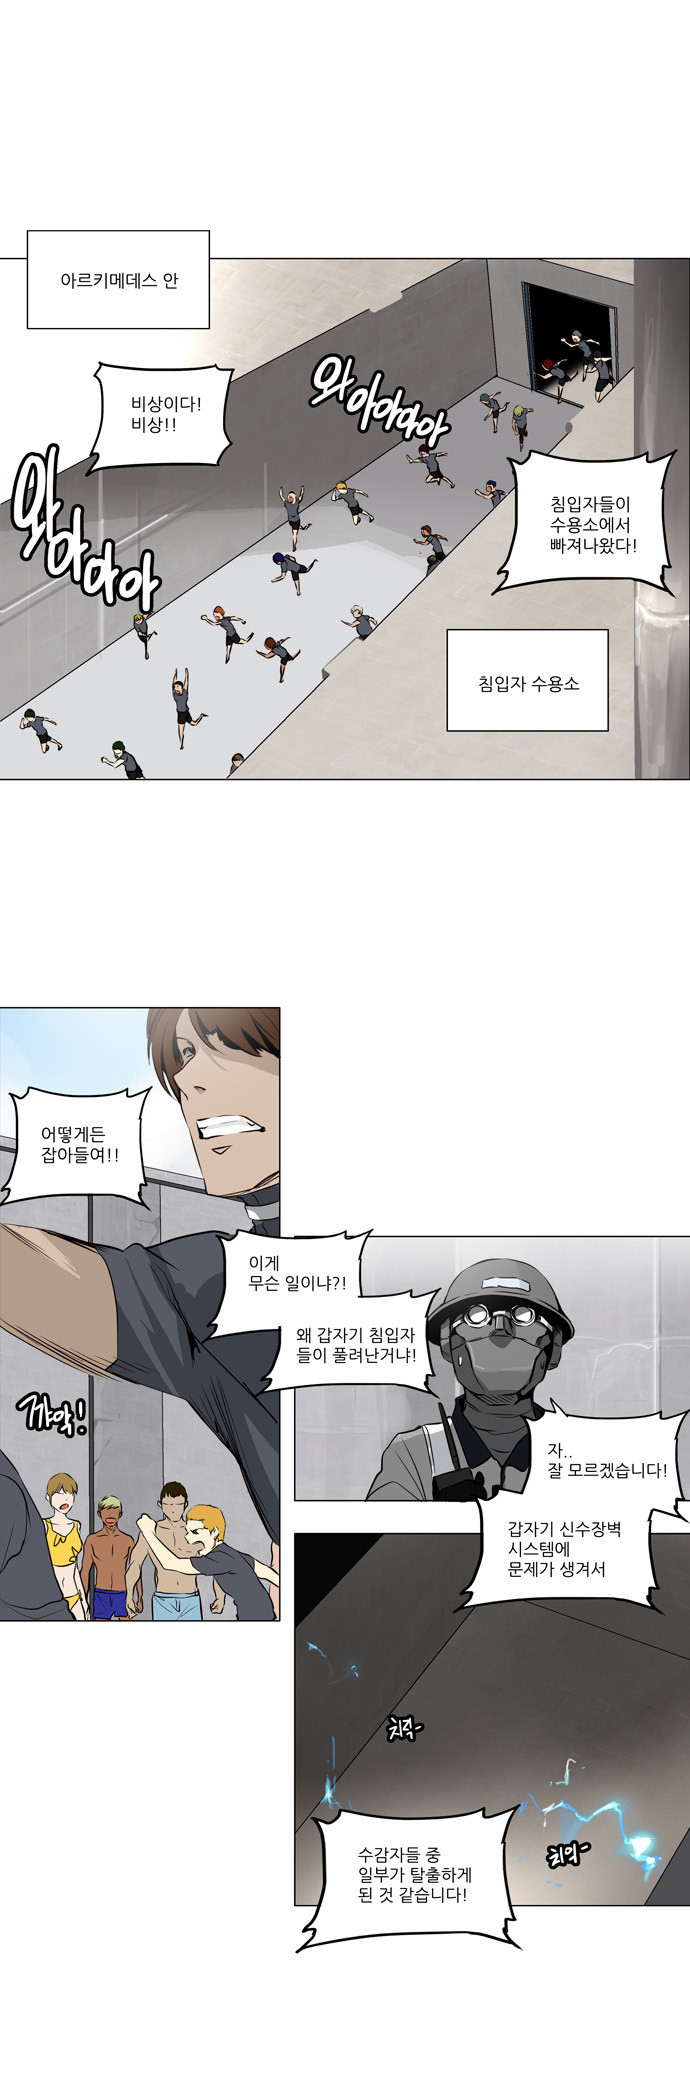 Tower of God - Chapter 169 - Page 1